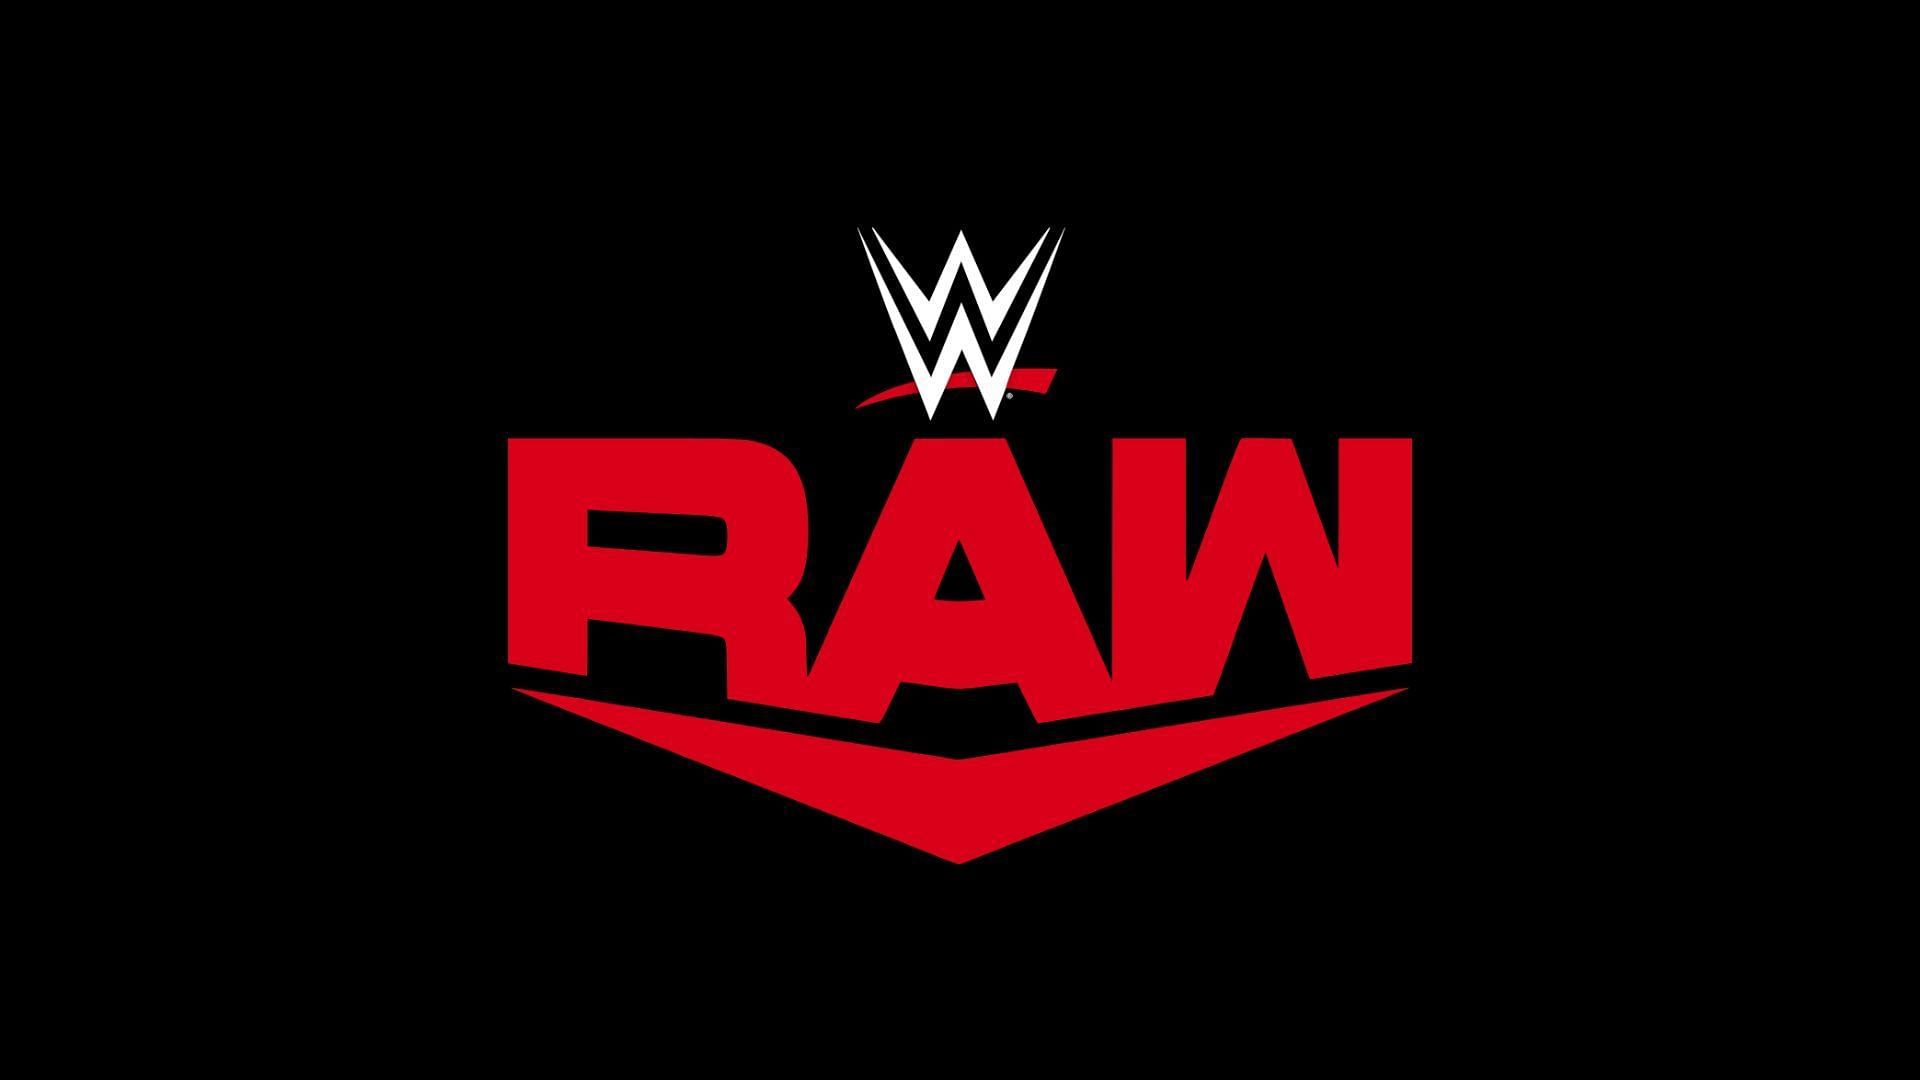 WWE RAW to feature massive title contest